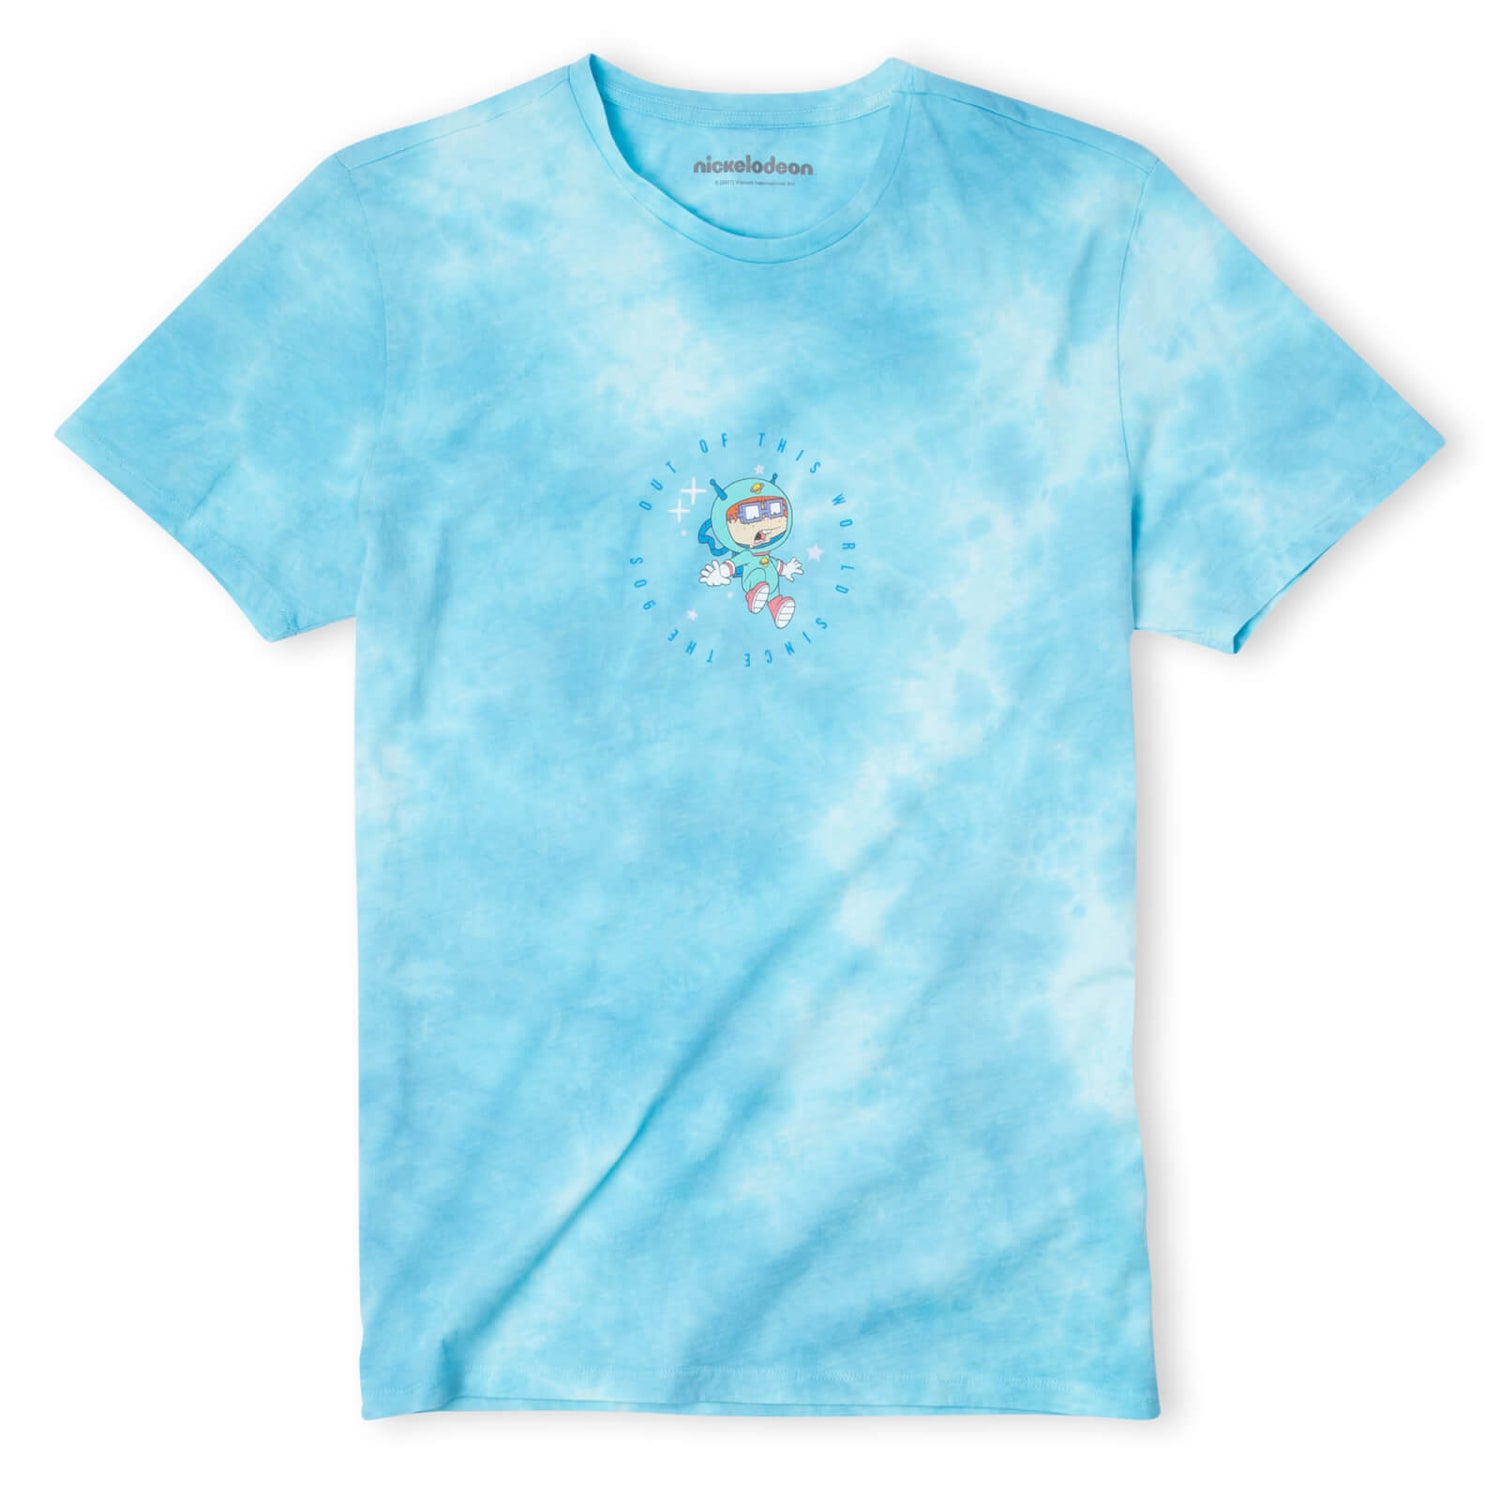 Nickelodeon Out Of This World Since The 90s Unisex T-Shirt - Turquoise Tie Dye